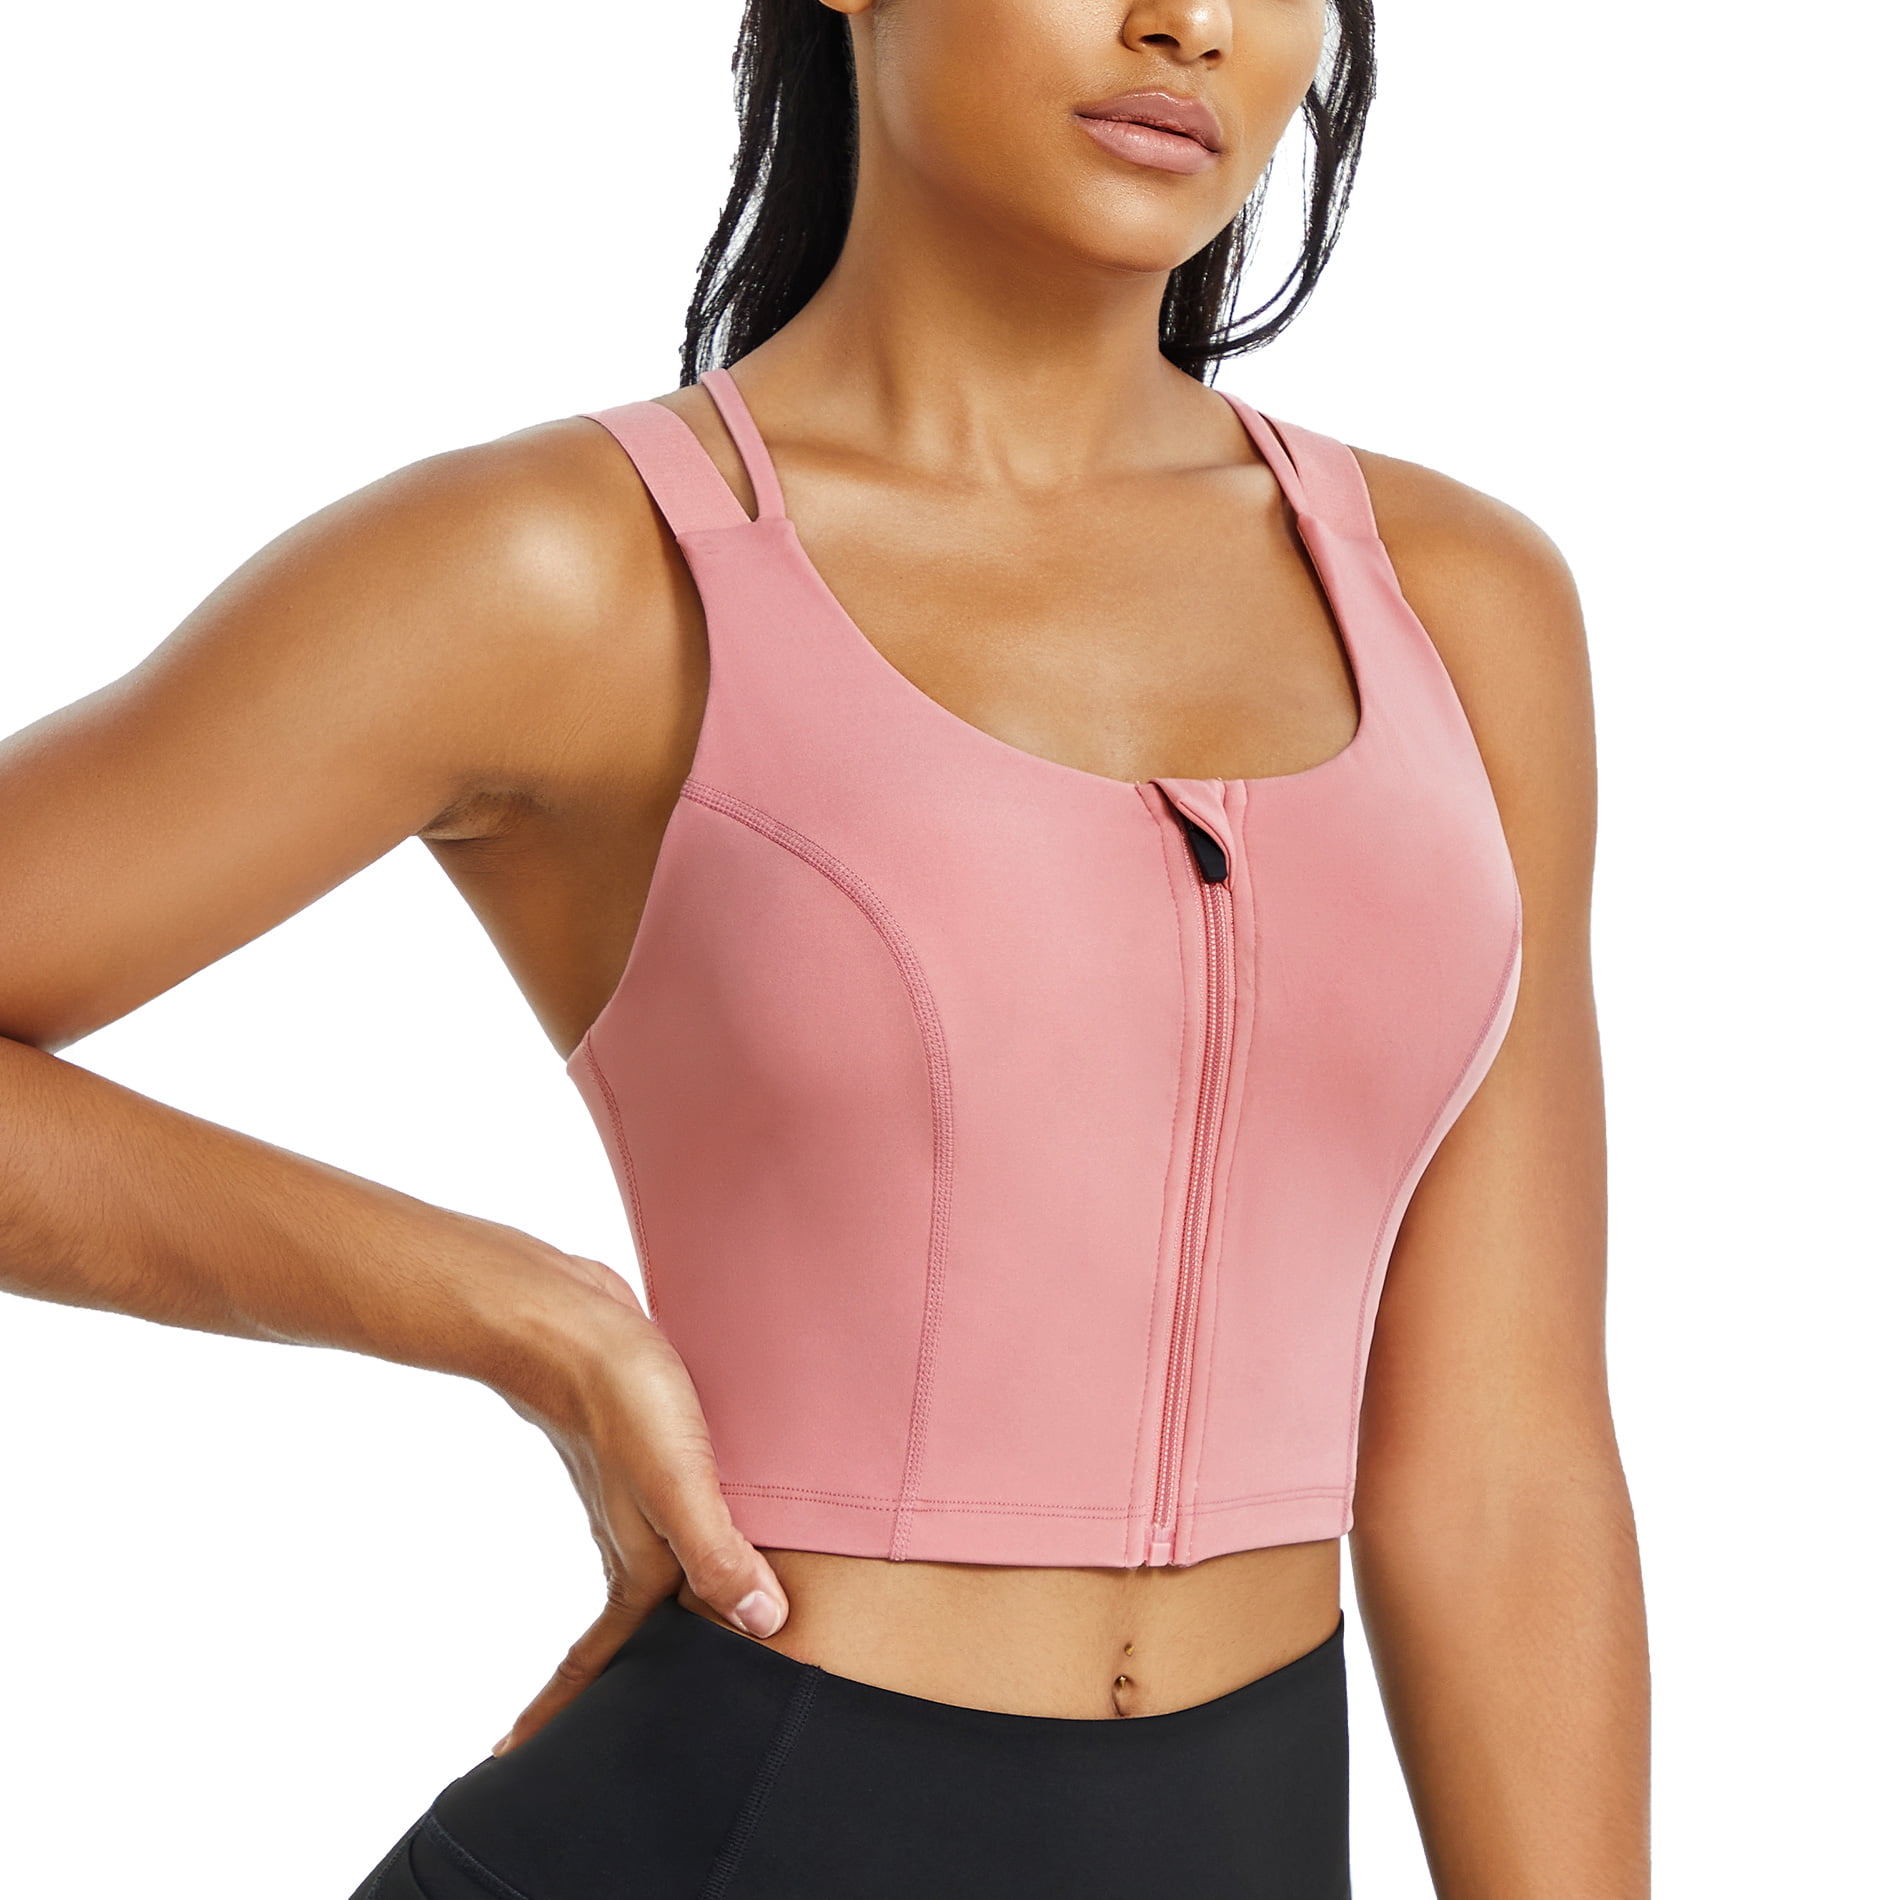 Gotoly Longline Sports Bra Criss Cross Top for Womens Strappy